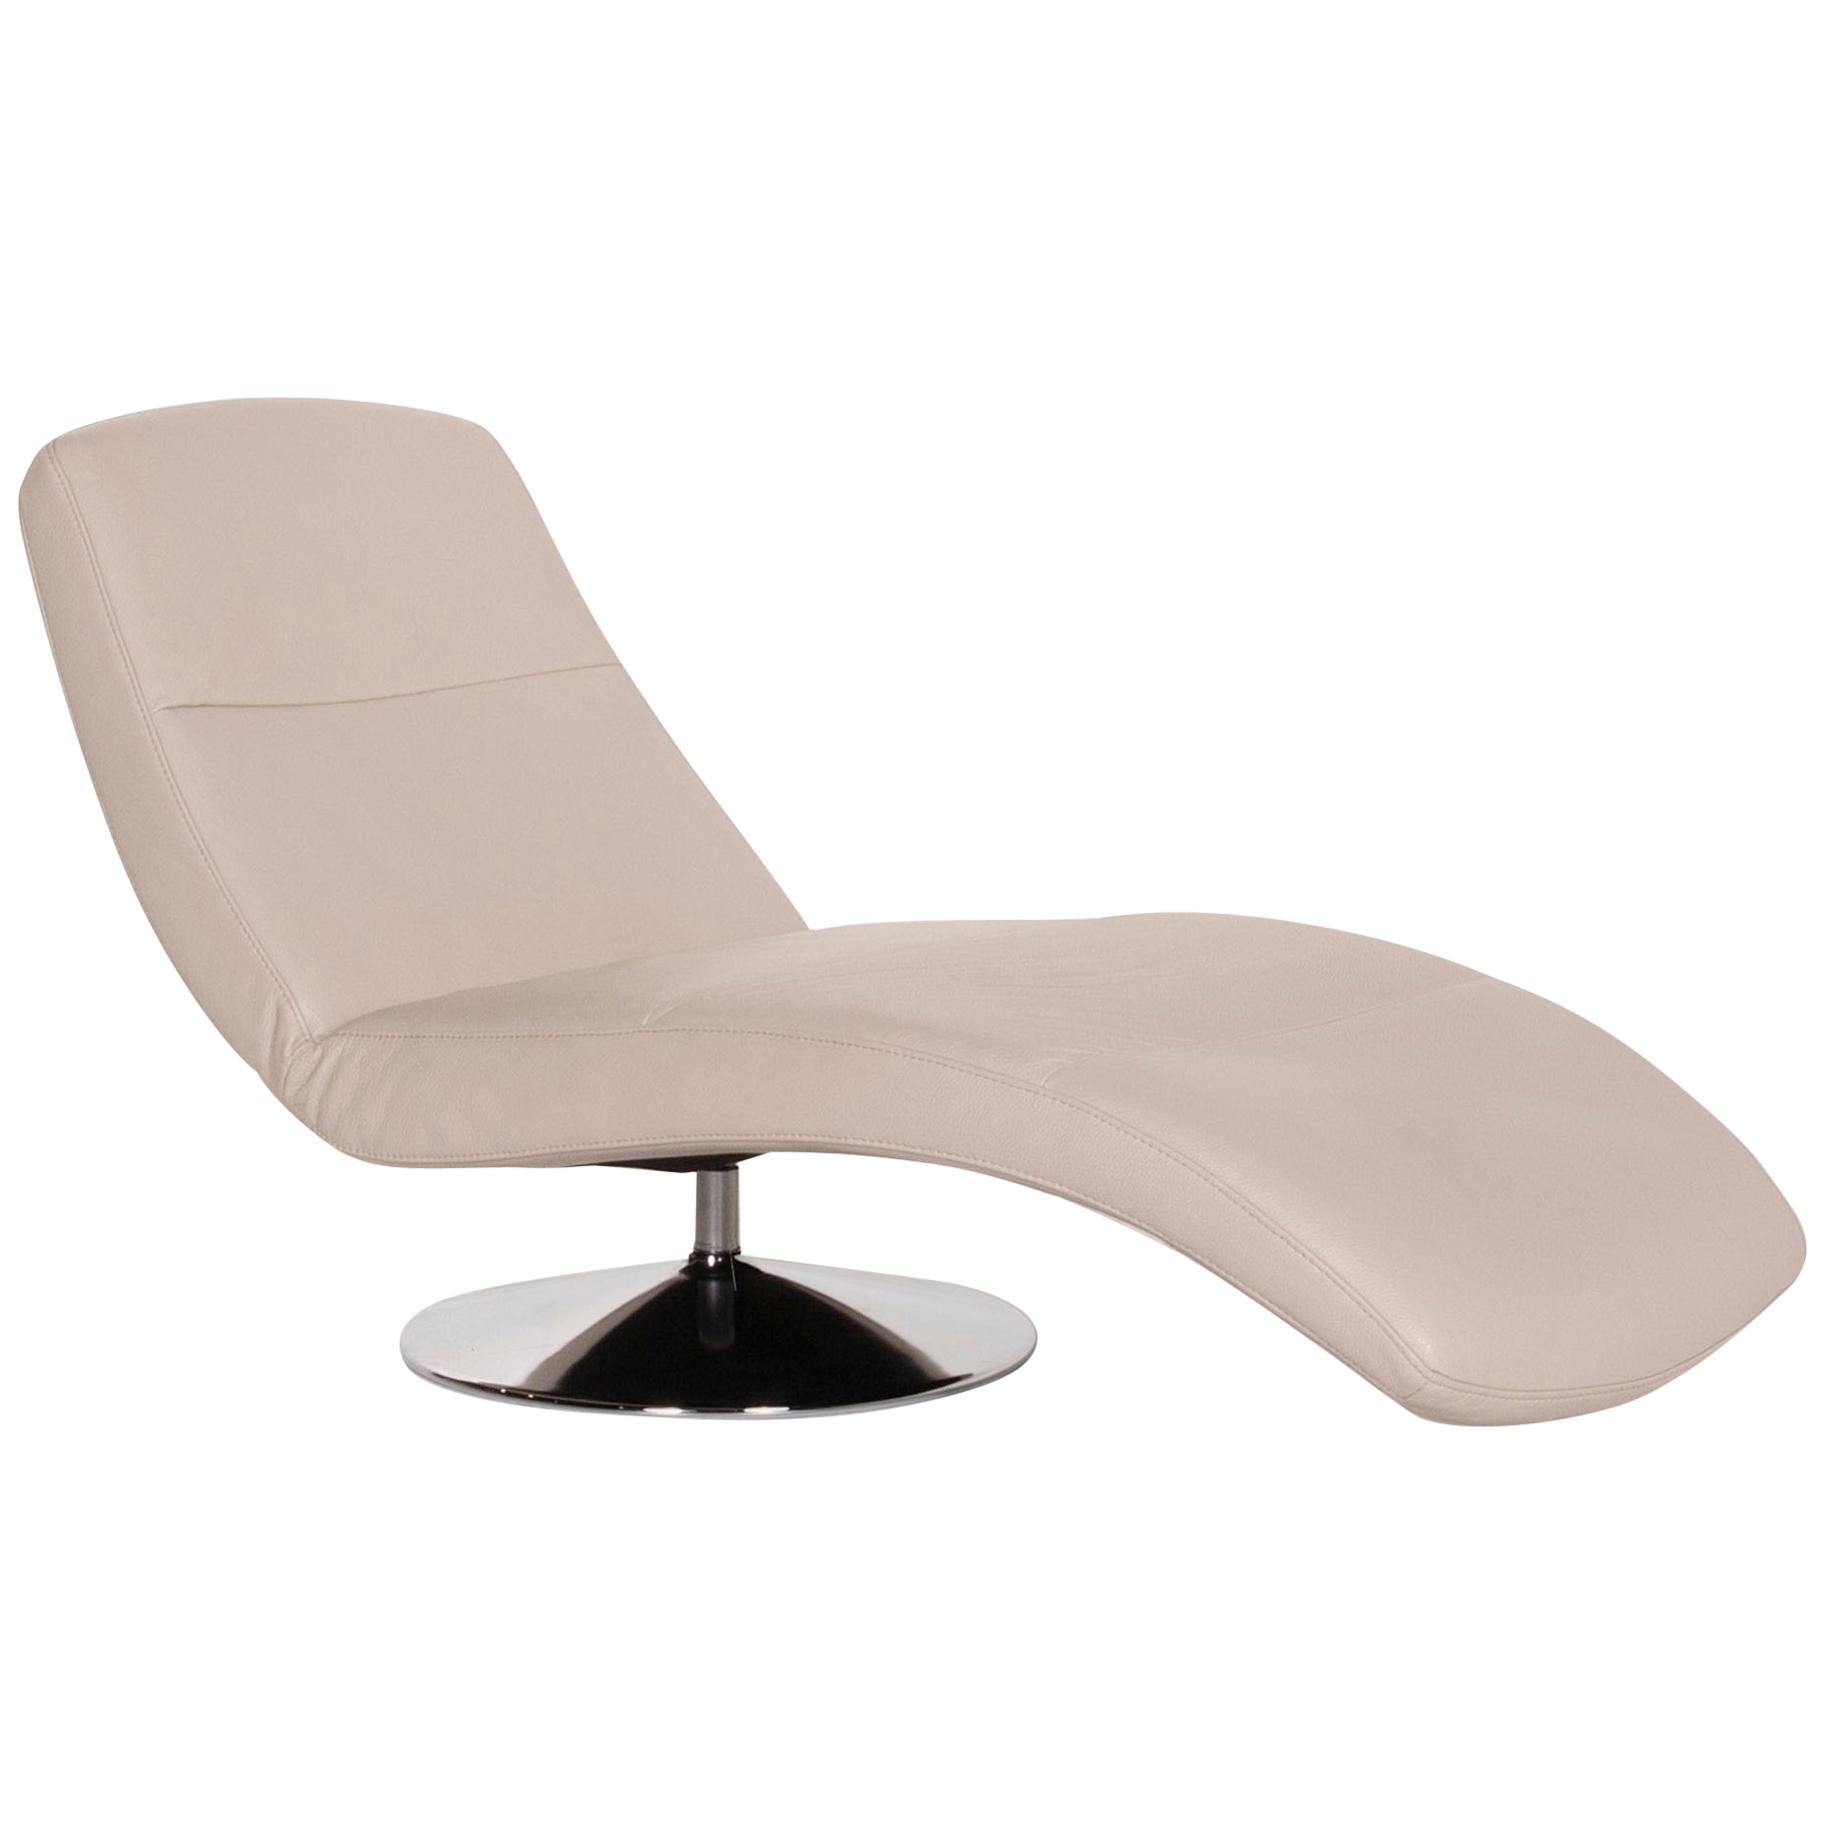 Ewald Schillig Leather Lounger Beige Relaxation Function